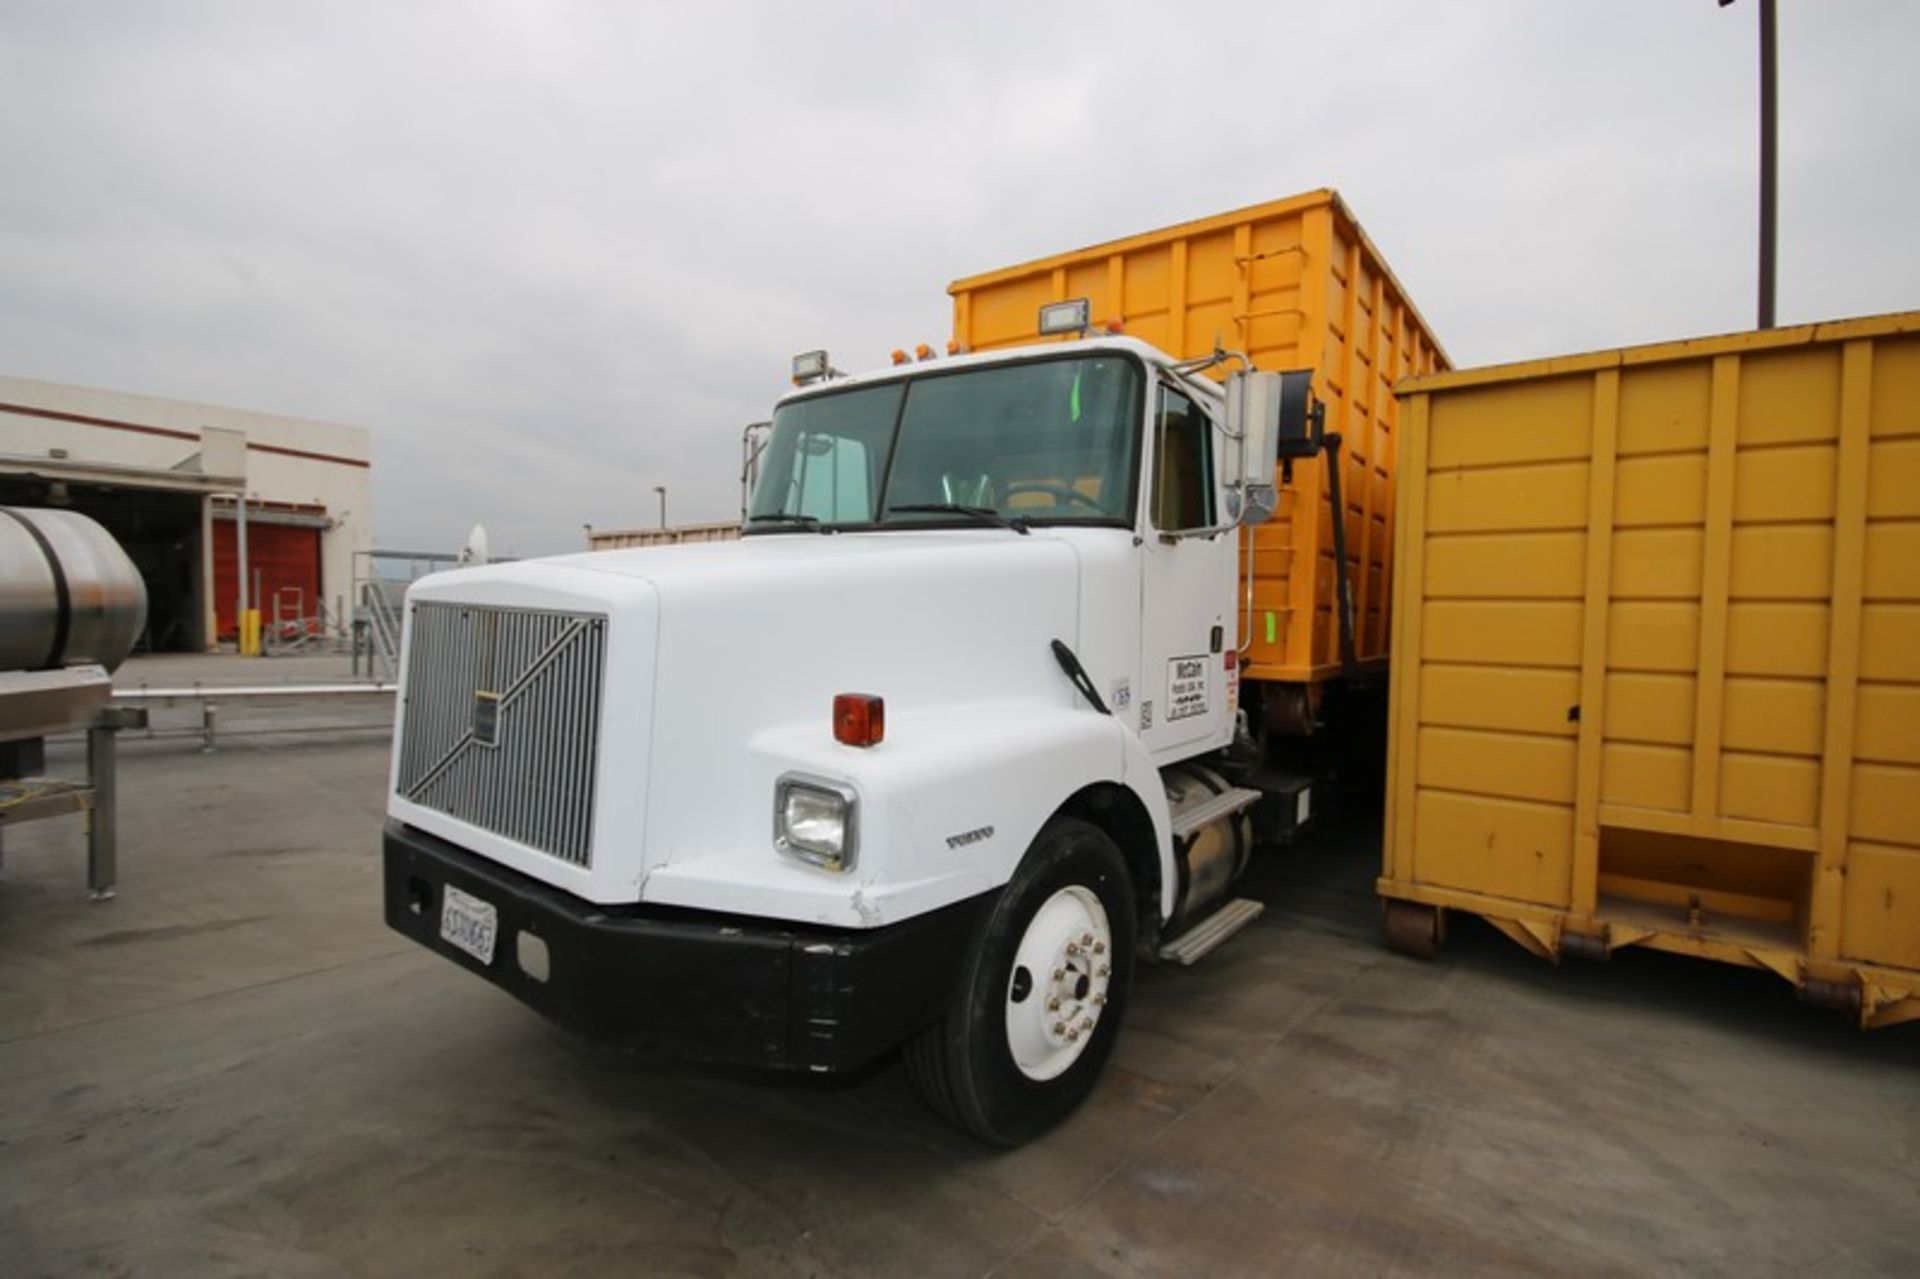 1996 Volvo White Roll-Off Truck, Vin #: 4V4JDBPF4TR850362, with Cum 94 M11-330E @ 18 Engine, with - Image 2 of 13